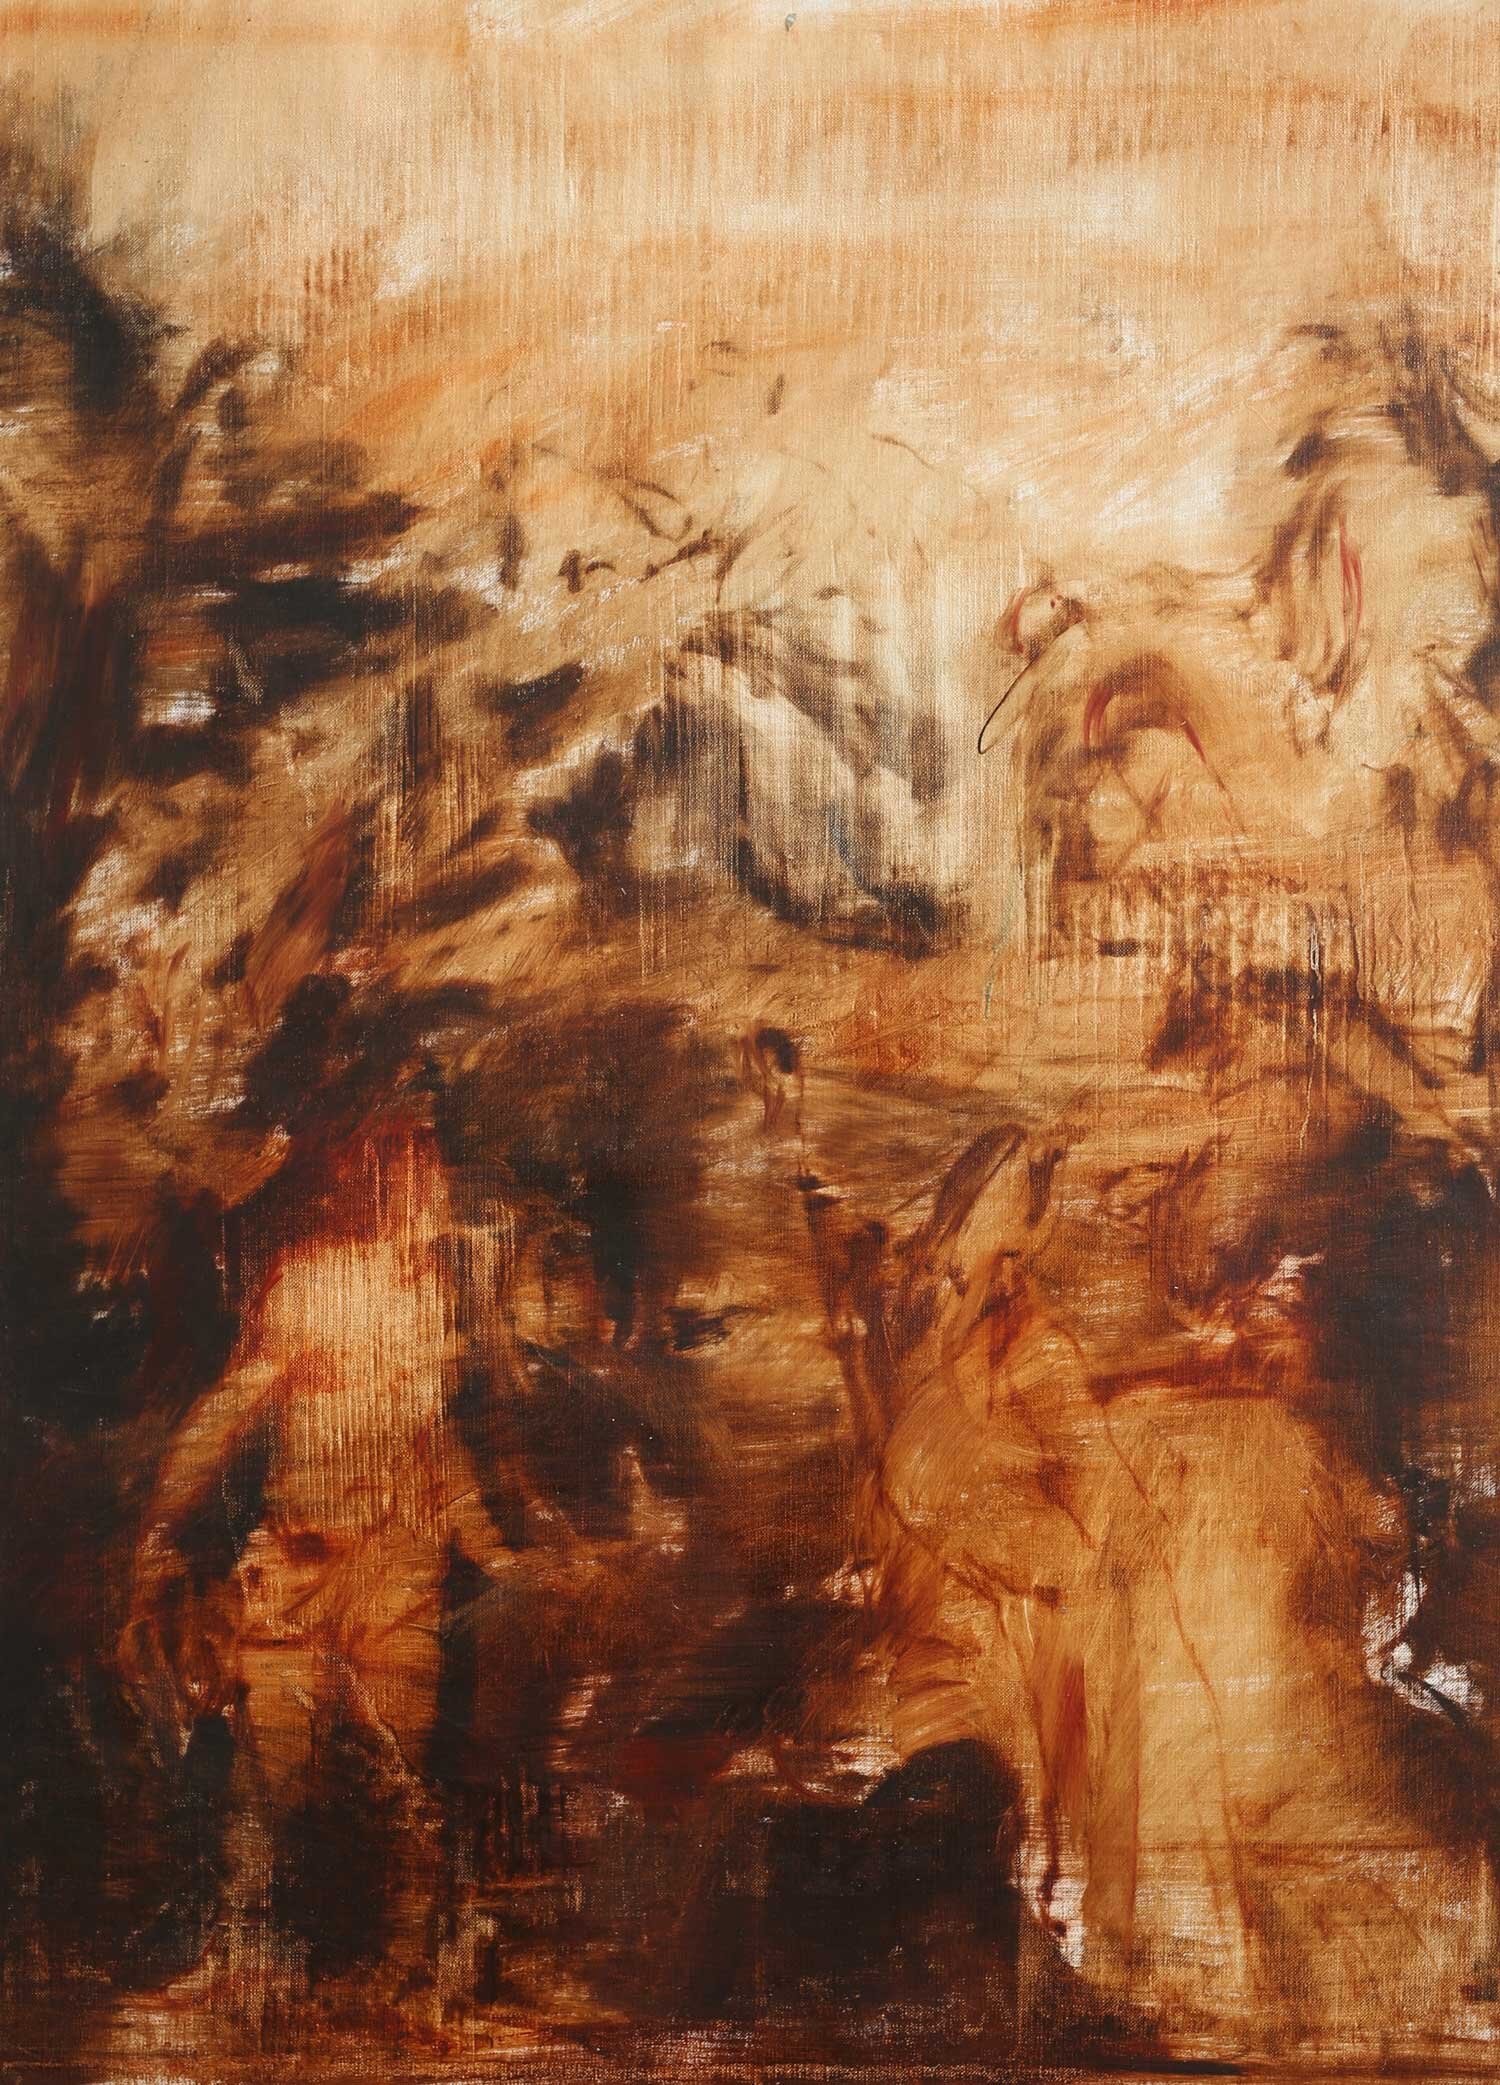 Study for The Mystical Marriage of St. Catherine 2, 69x90cm